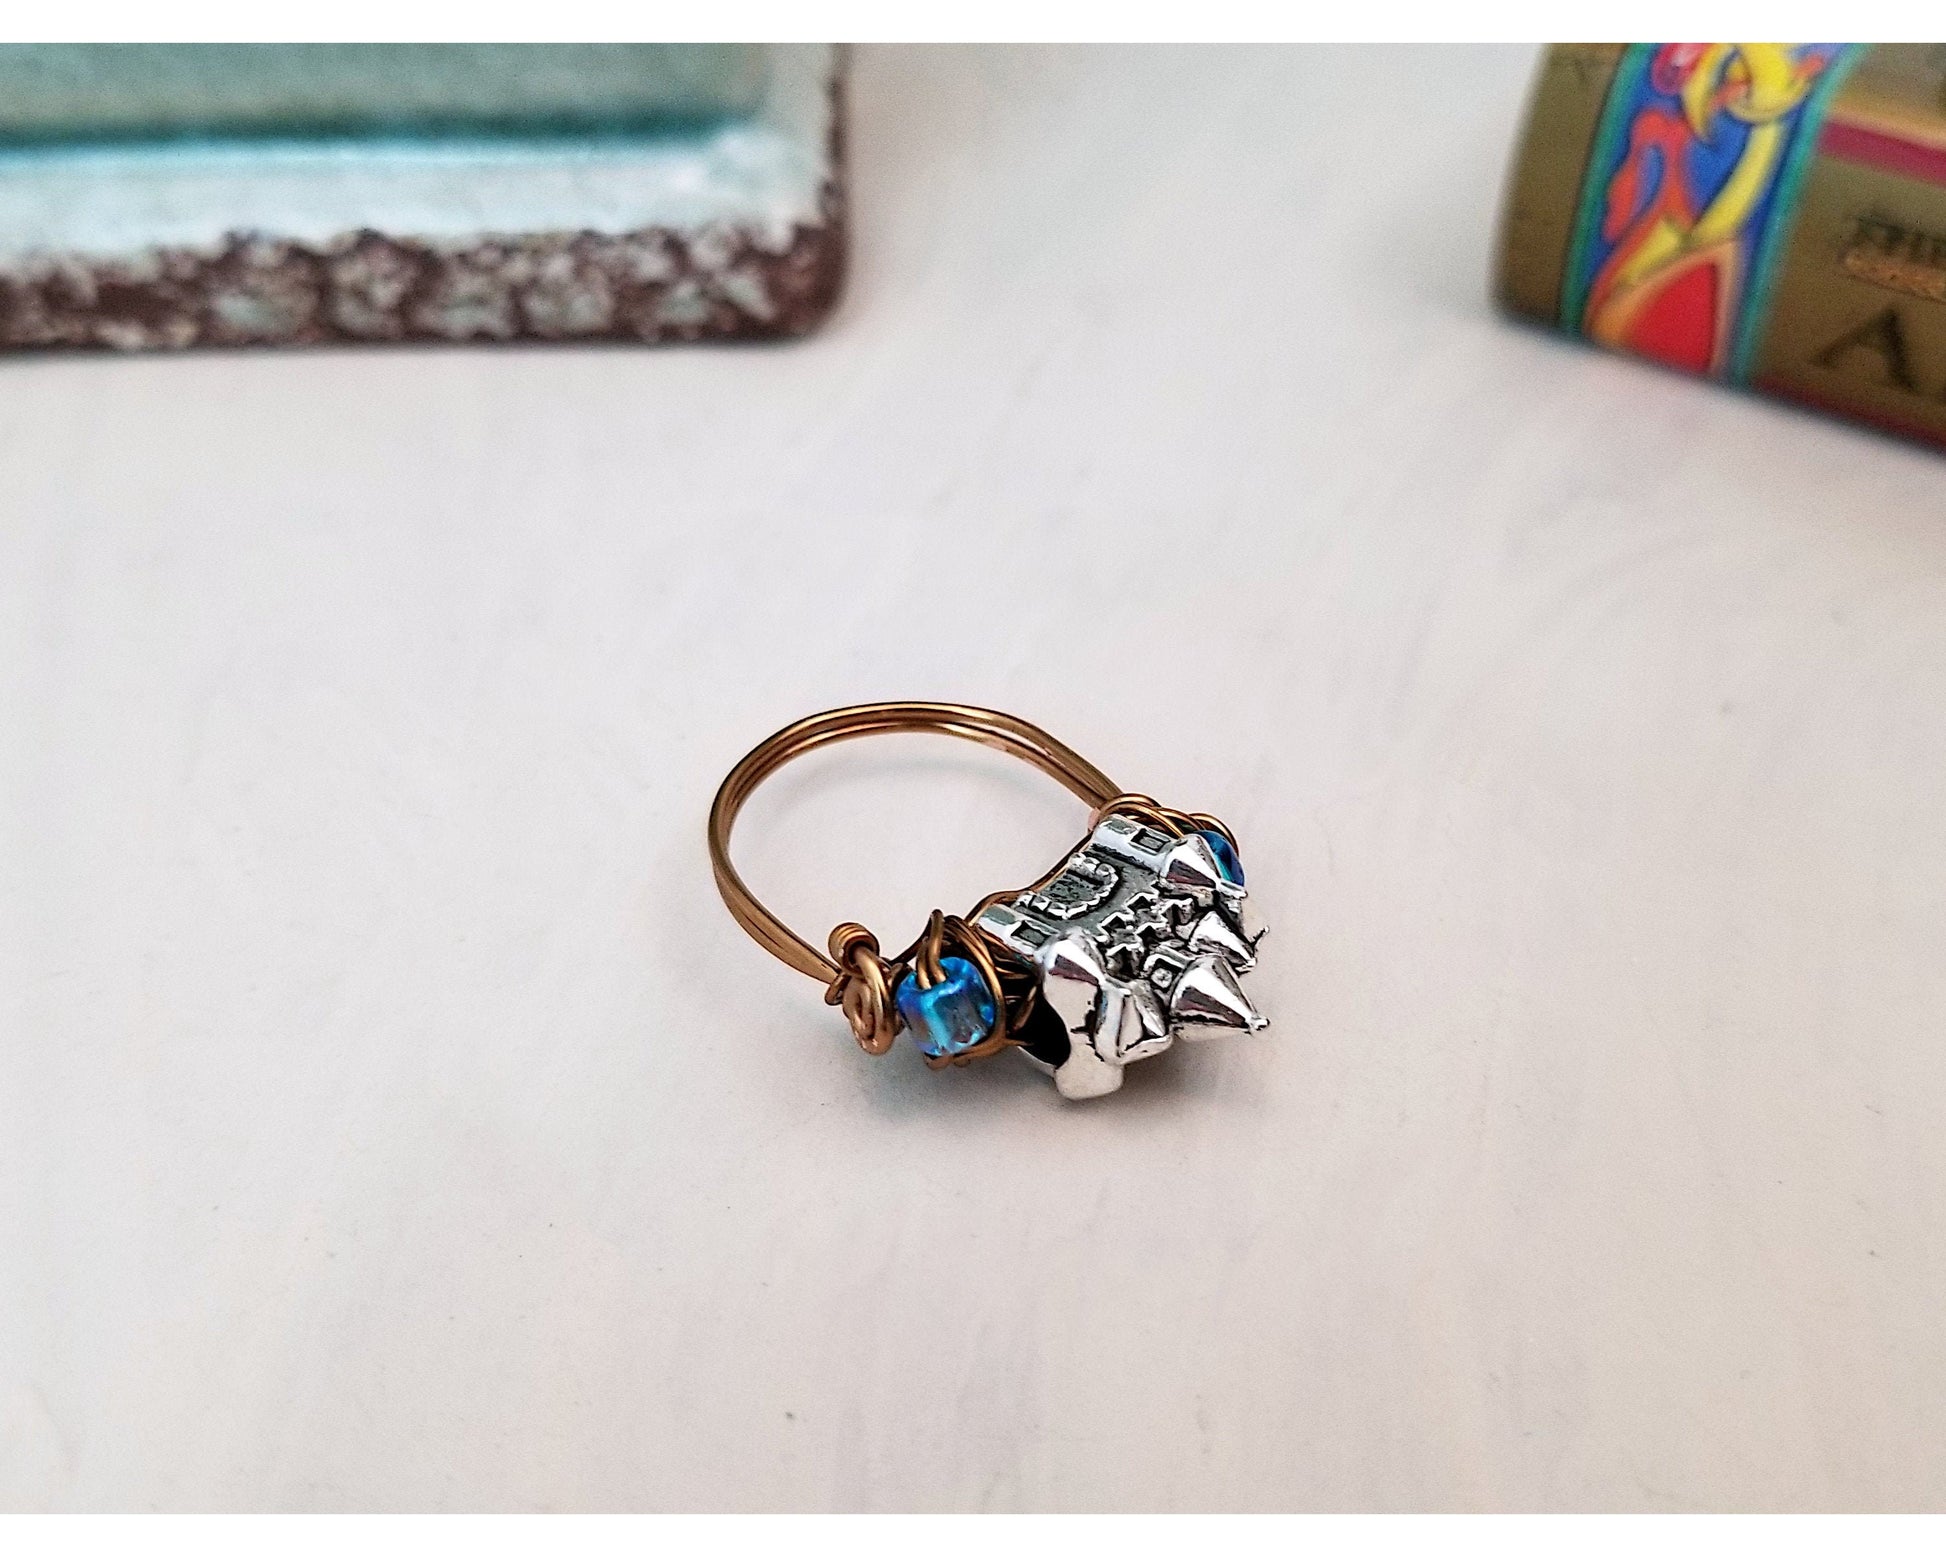 Castle Ring in Blue, Fairy Tale, Wedding, Bridesmaid, Gothic, Renaissance, Medieval, Choice of Colors and Metals